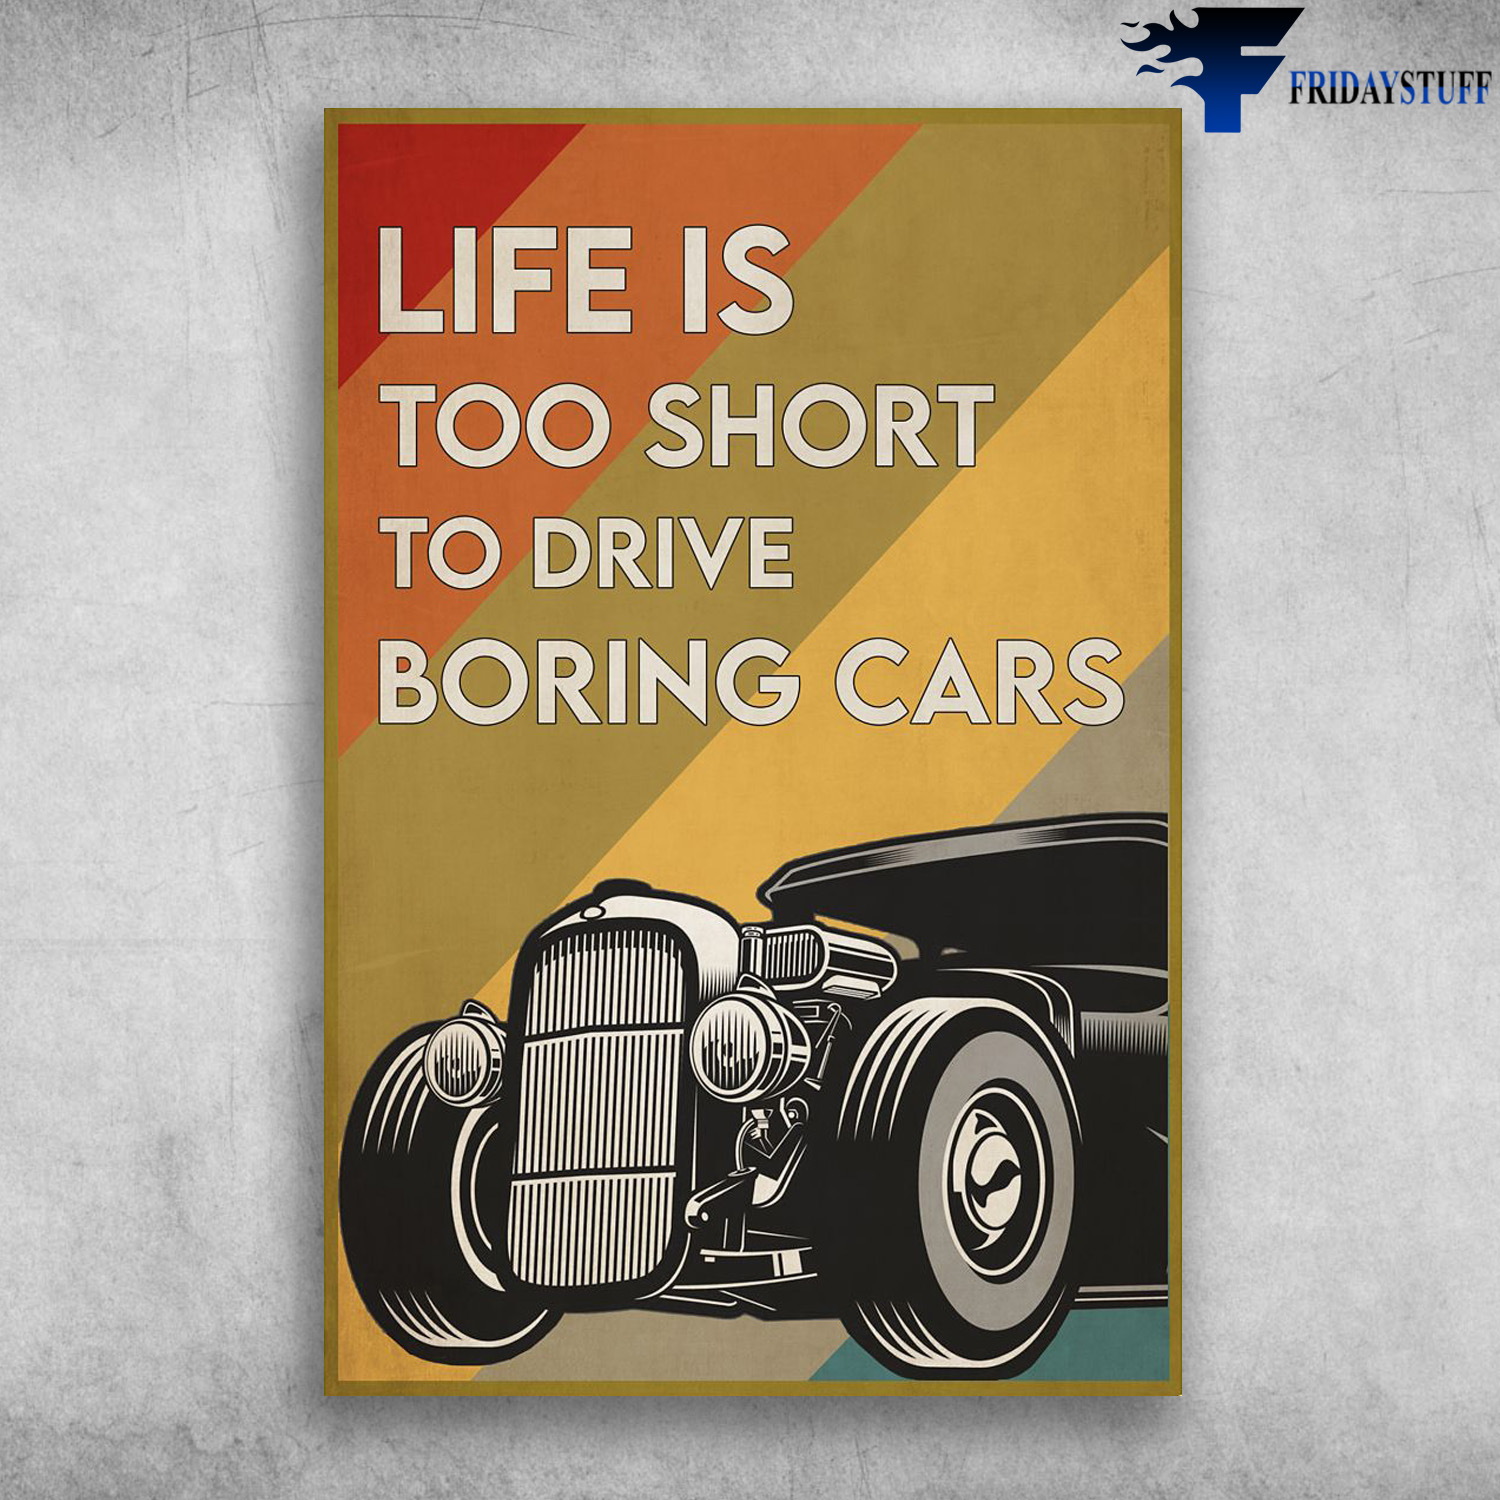 https://fridaystuff.com/wp-content/uploads/2021/03/The-Hot-Rod-Life-Is-Too-Short-To-Boring-Cars.jpg